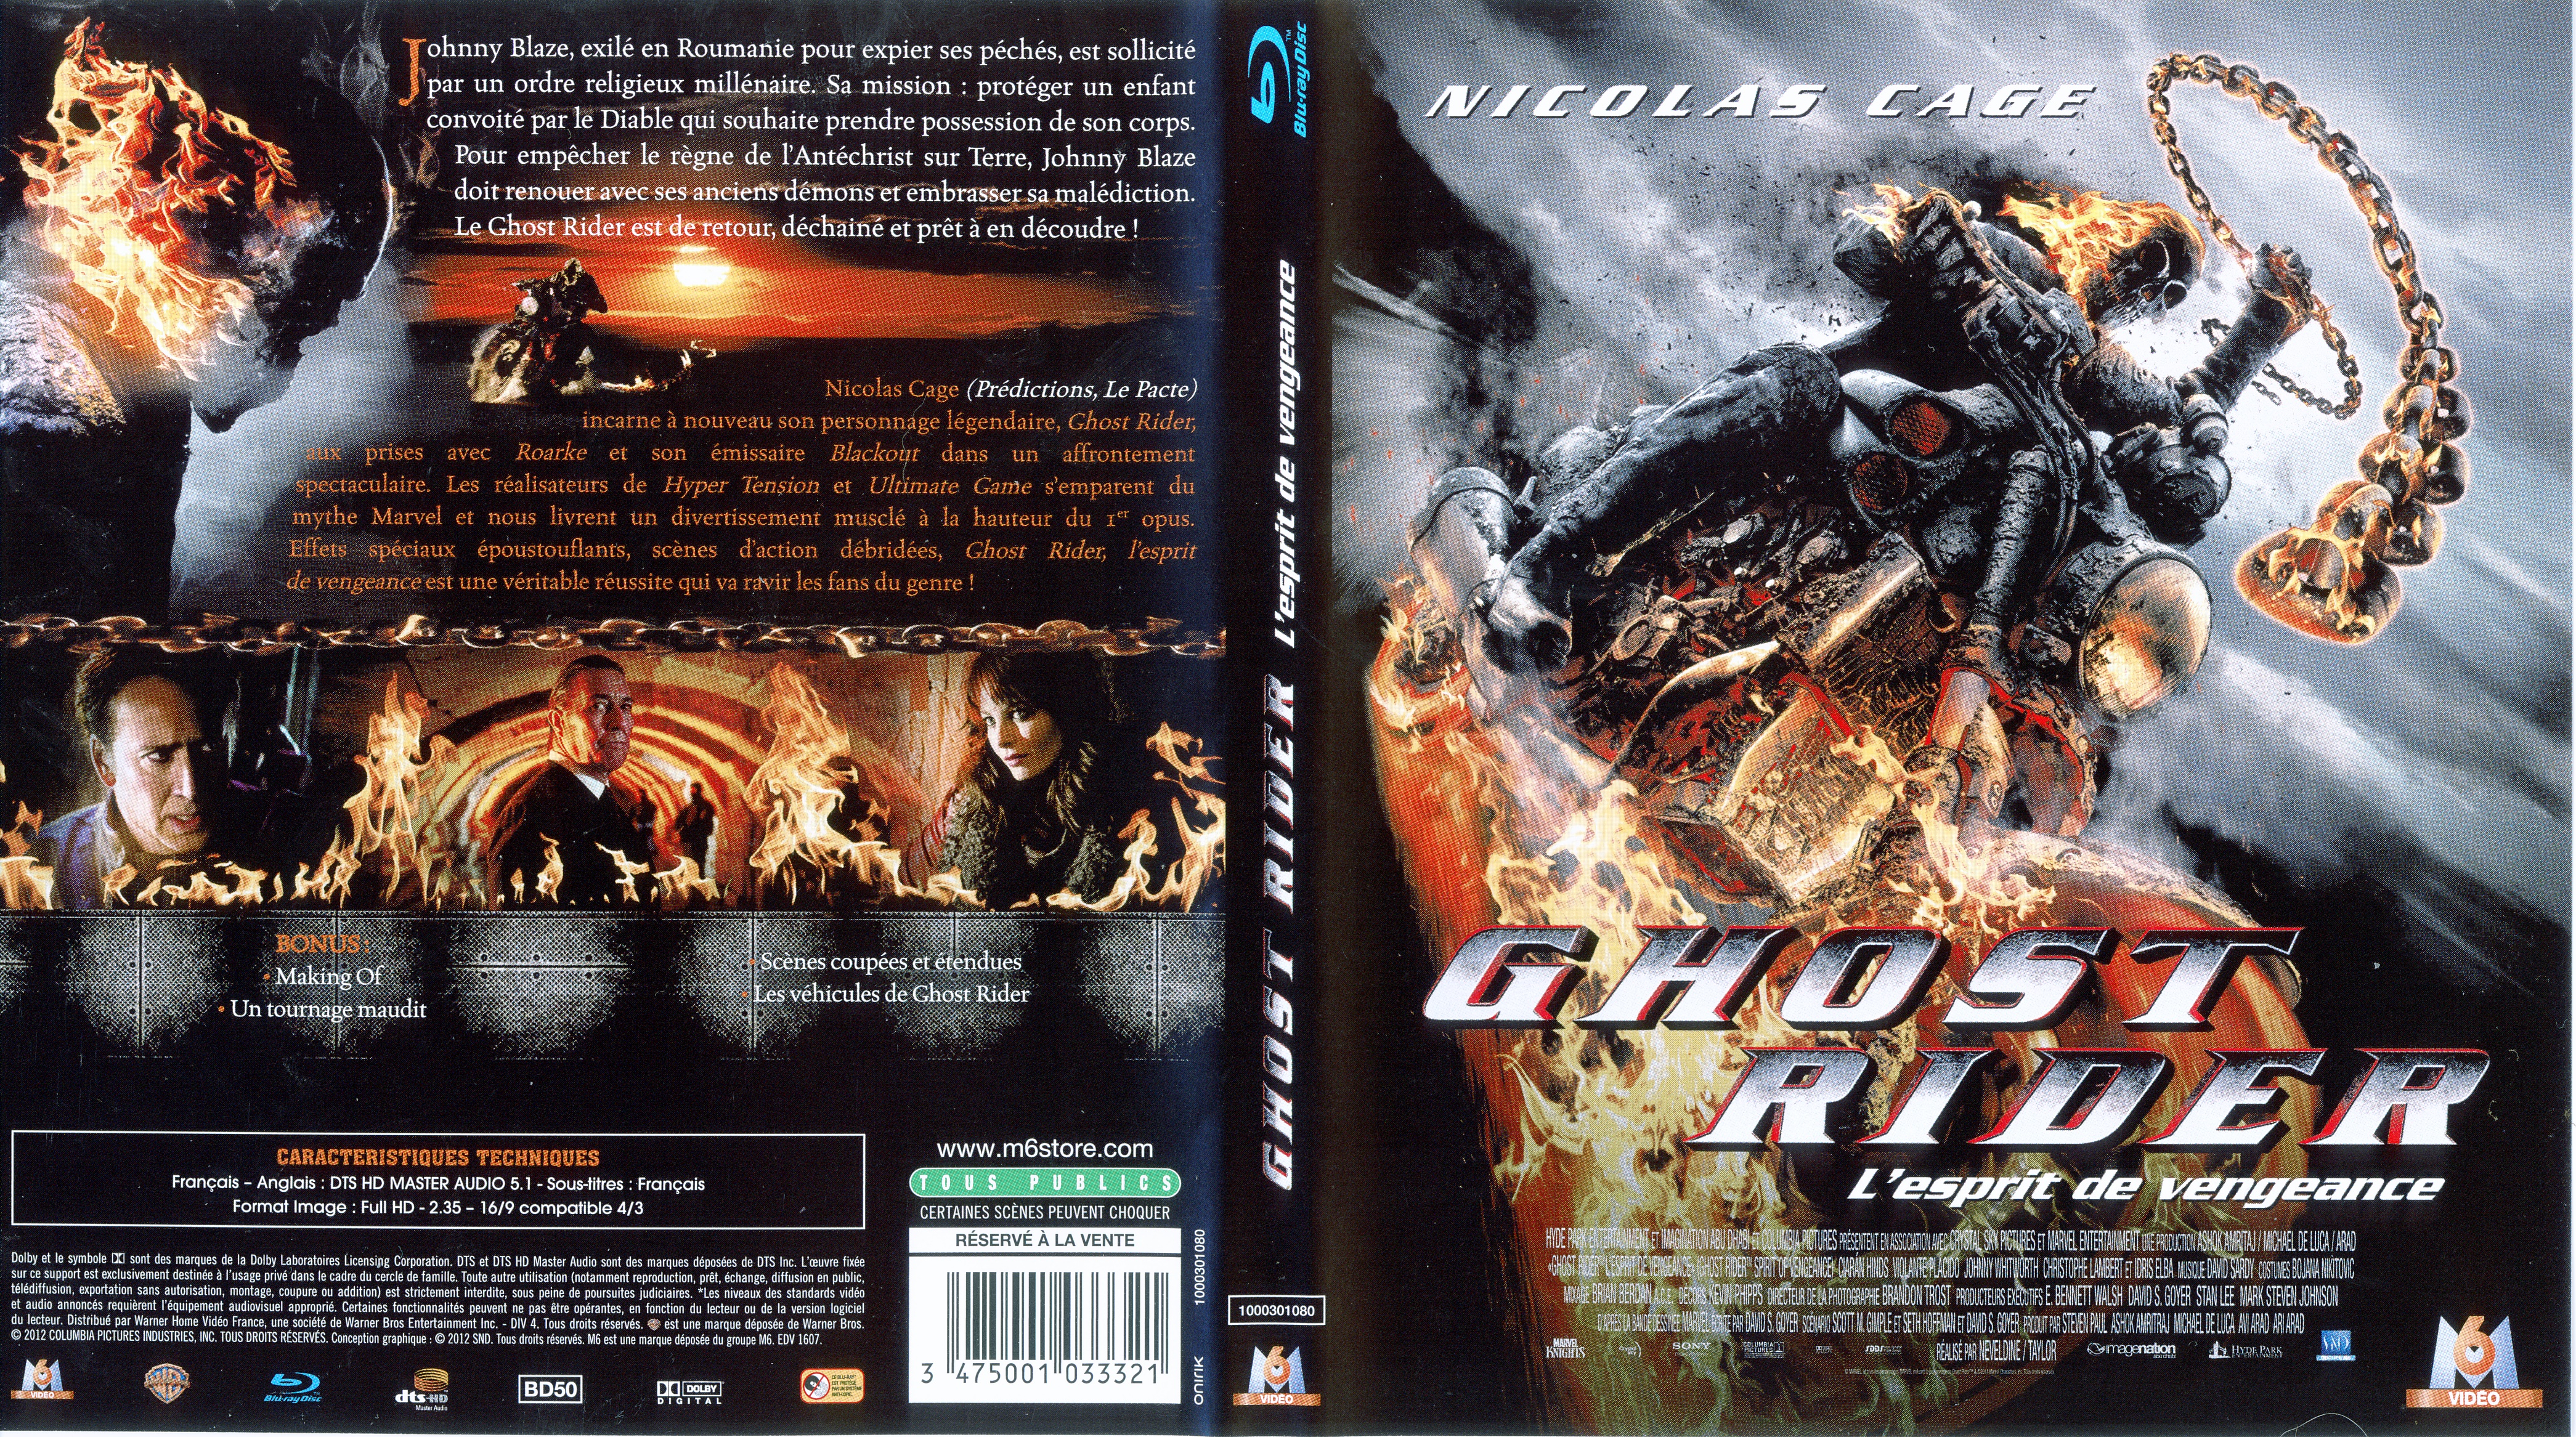 Jaquette DVD Ghost Rider 2 l